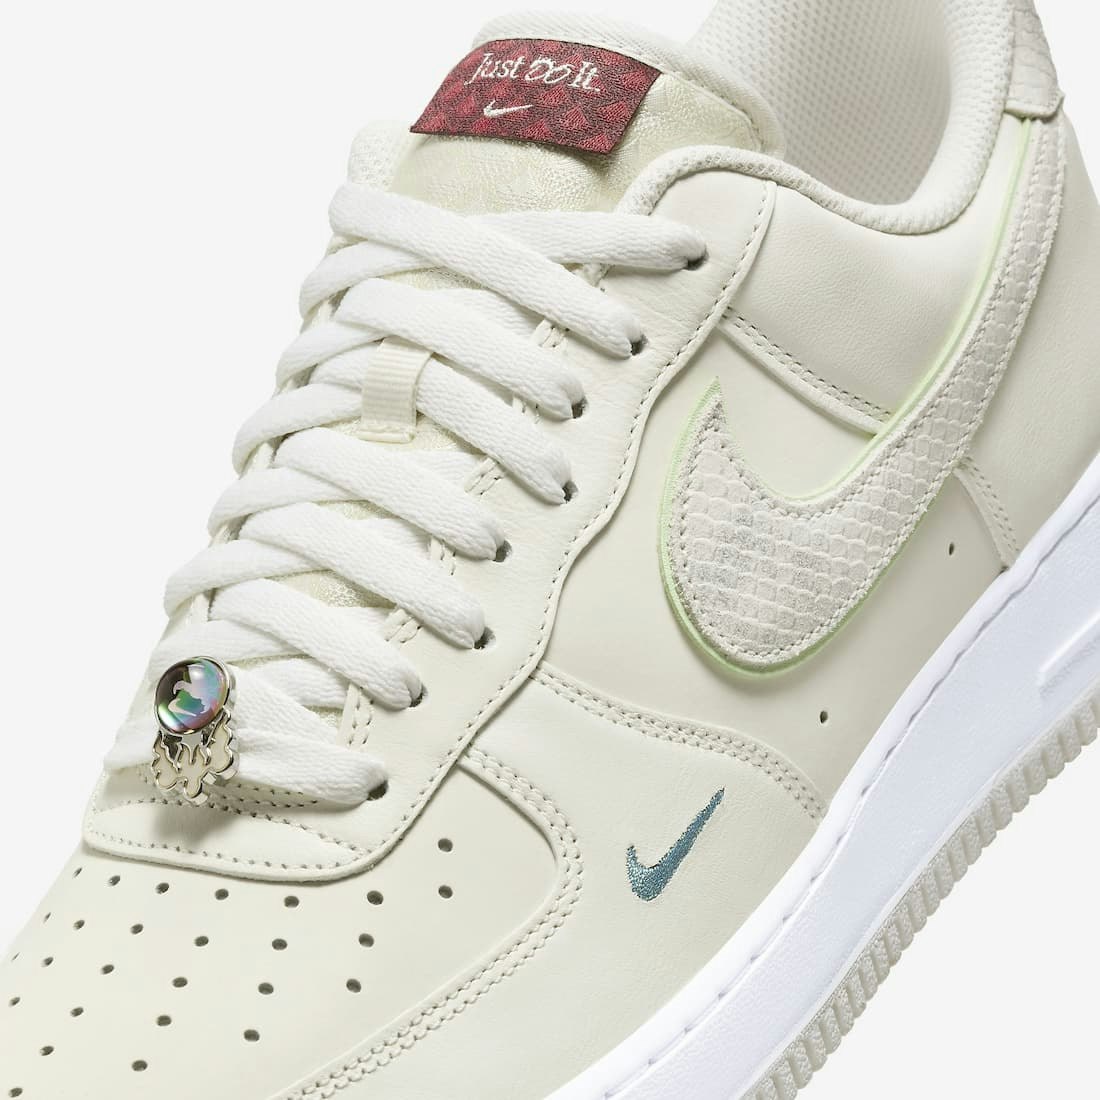 Nike Air Force 1 Low "Year of the Dragon" (Sail)